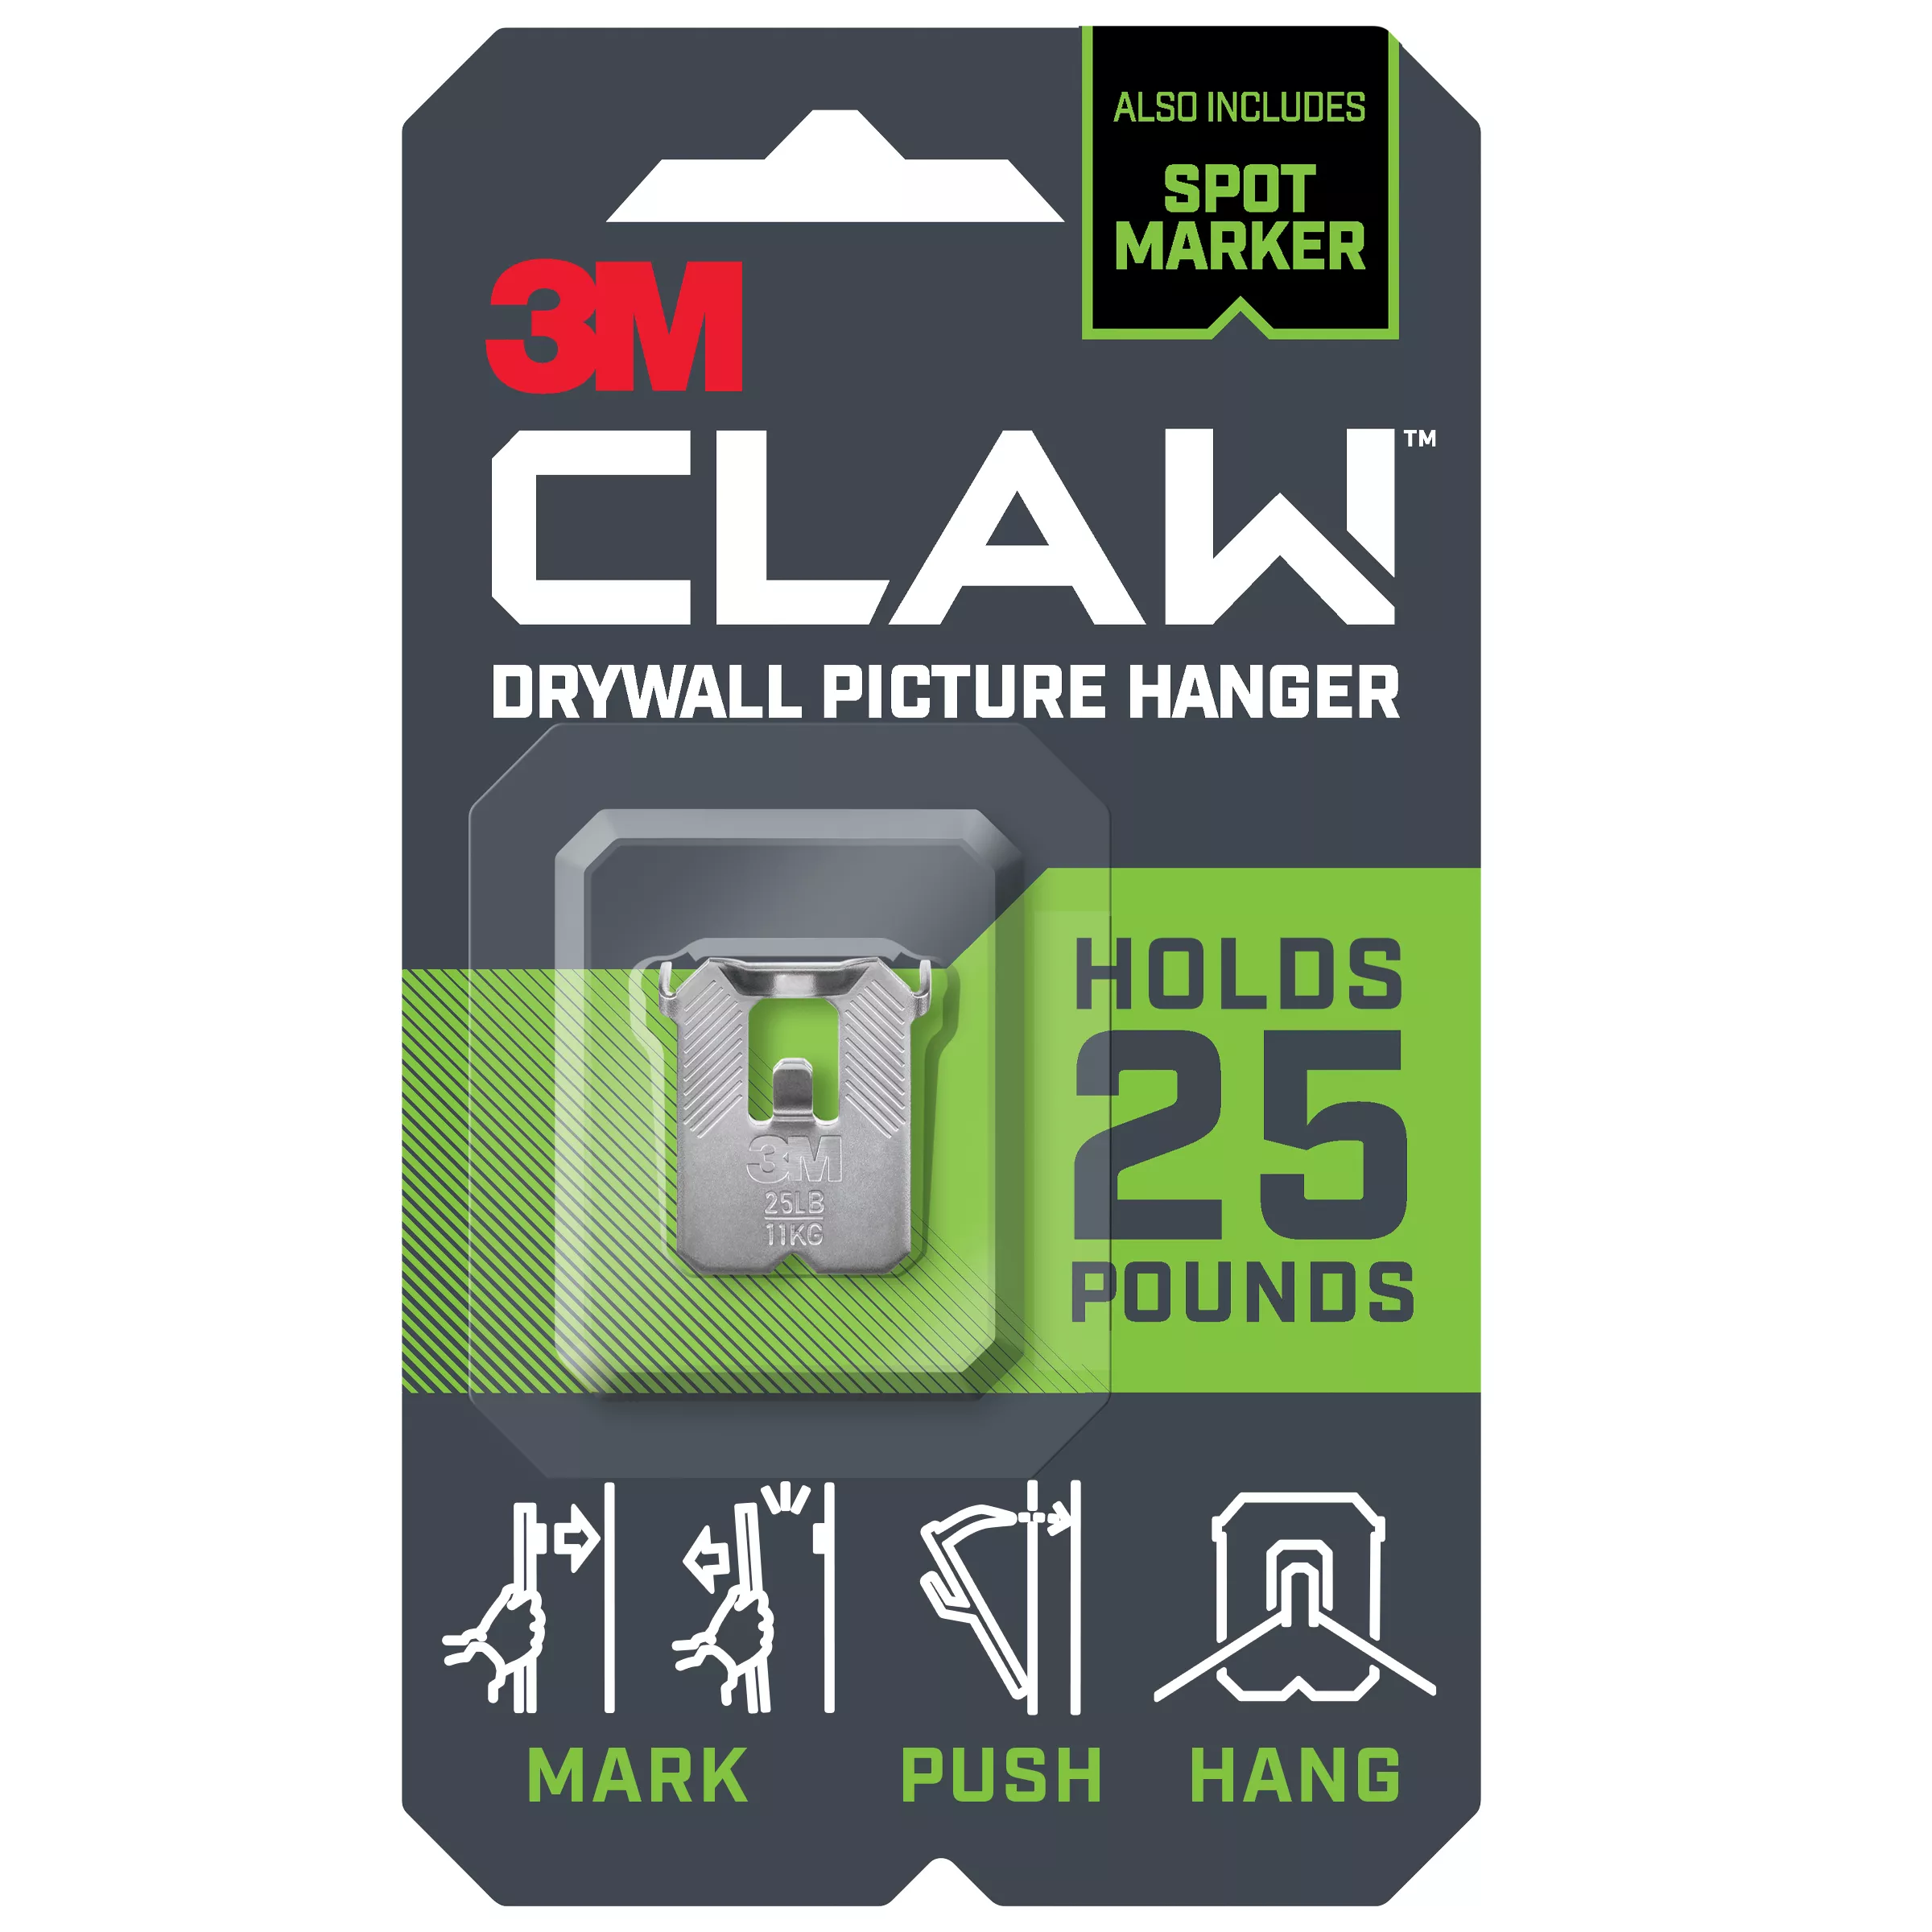 SKU 7100233219 | 3M CLAW™ Drywall Picture Hanger 25 lb with Temporary Spot Marker 3PH25M-1ES